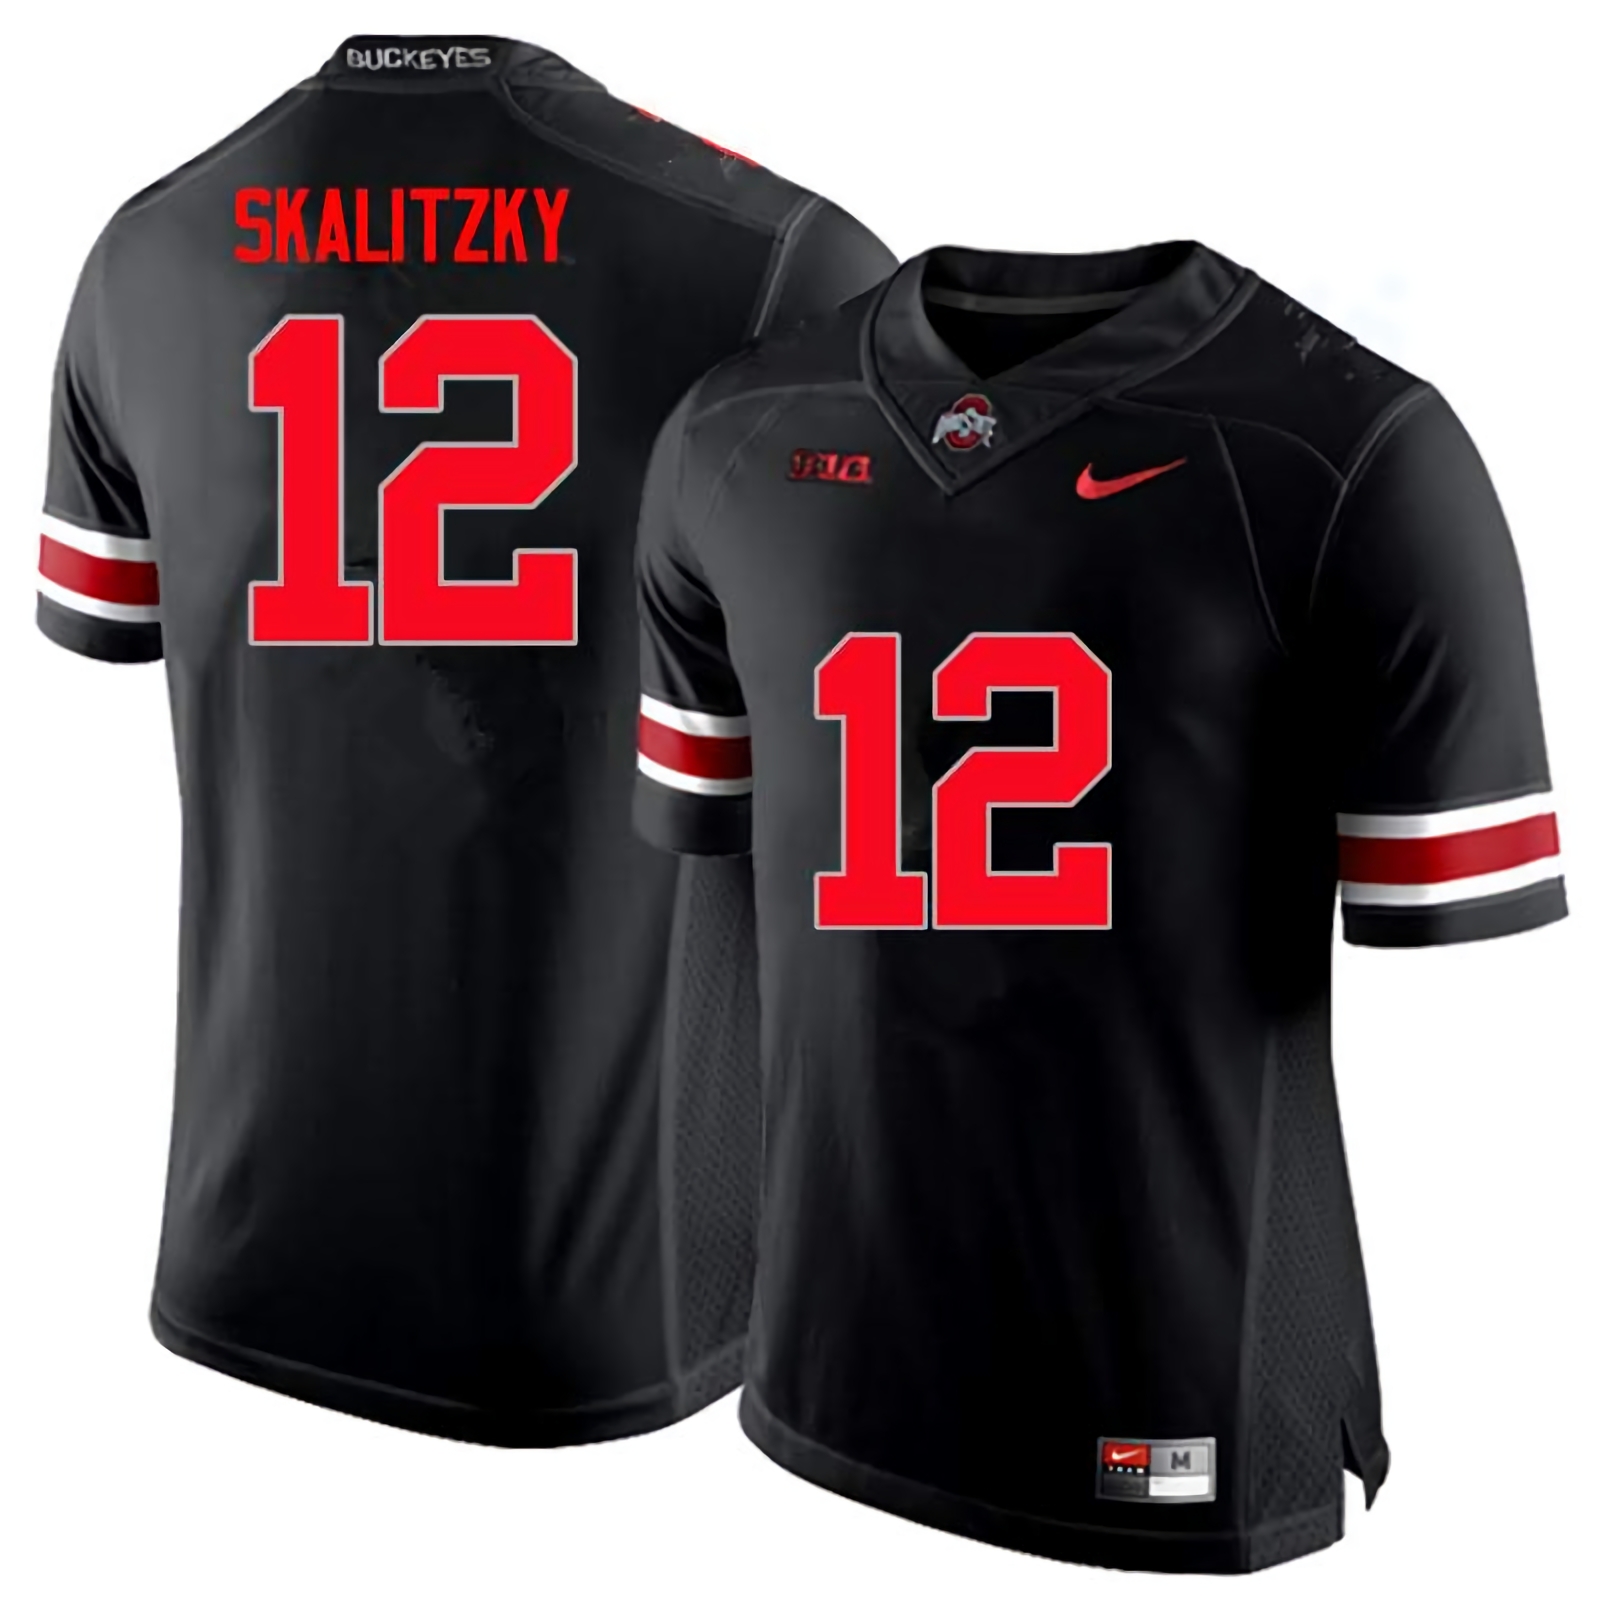 Brendan Skalitzky Ohio State Buckeyes Men's NCAA #12 Nike Black Limited College Stitched Football Jersey GQO6256CU